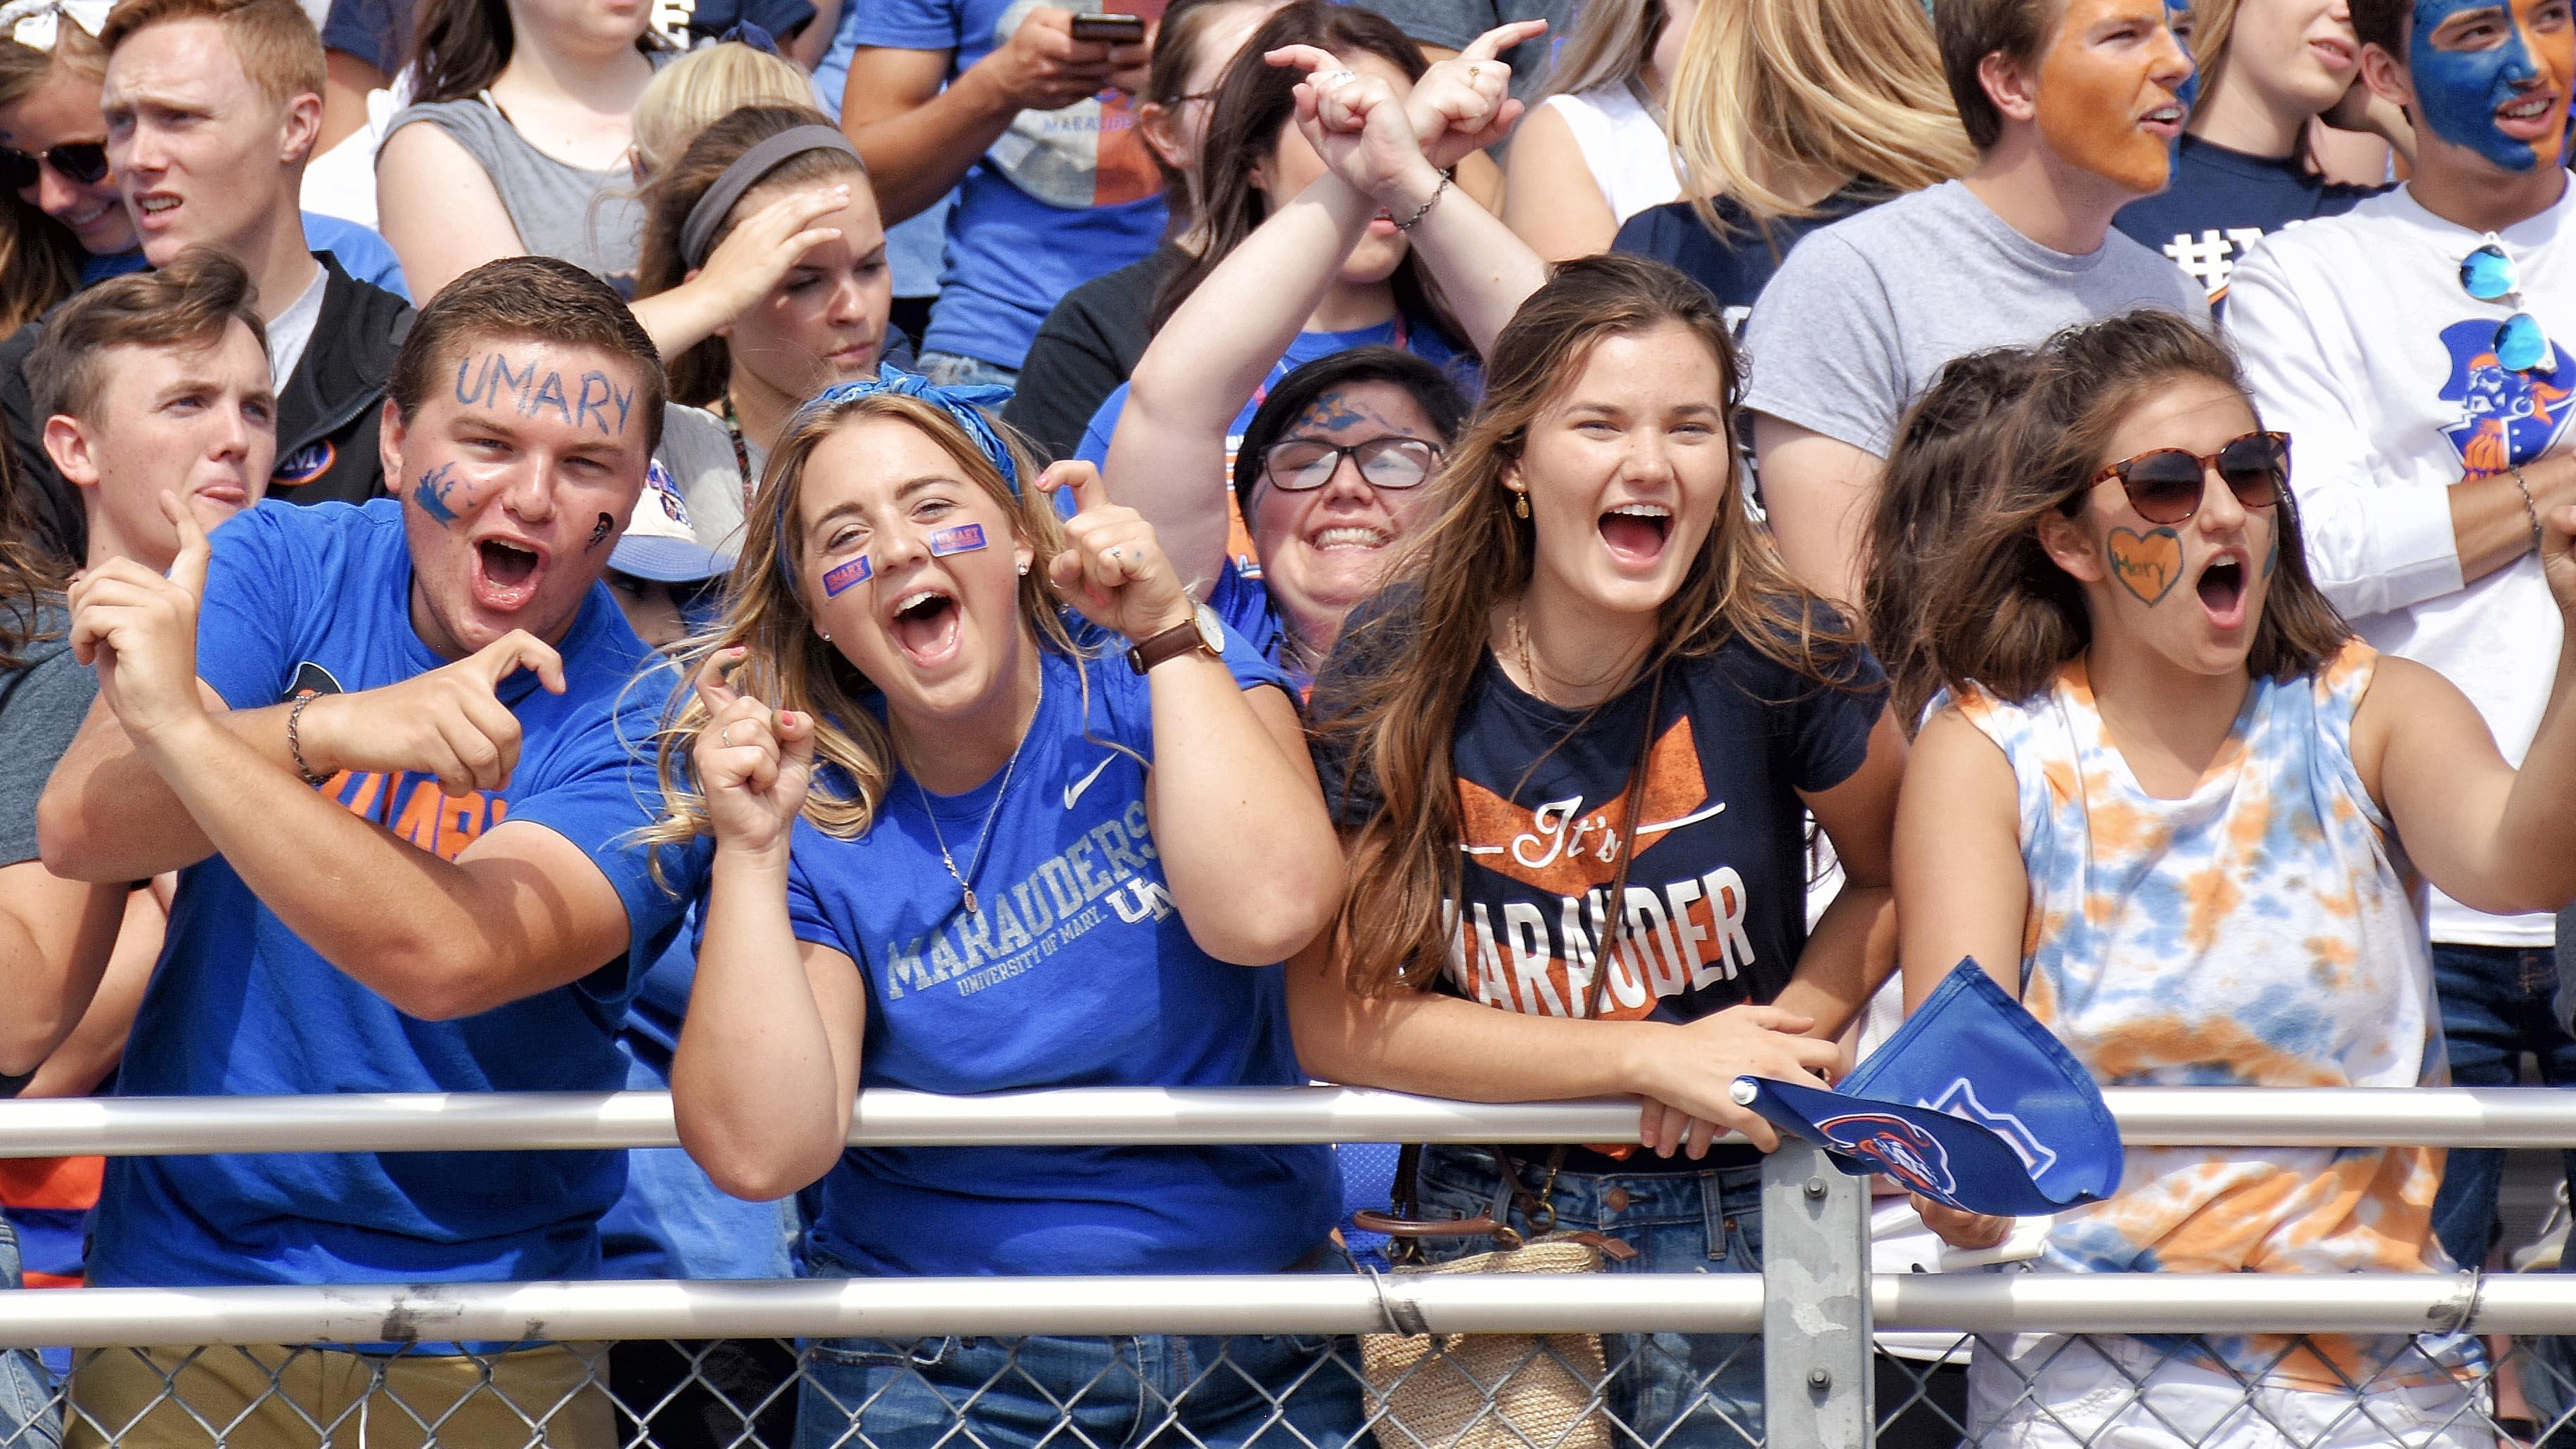 Crowd of University of Mary students cheering on the athletic teams.